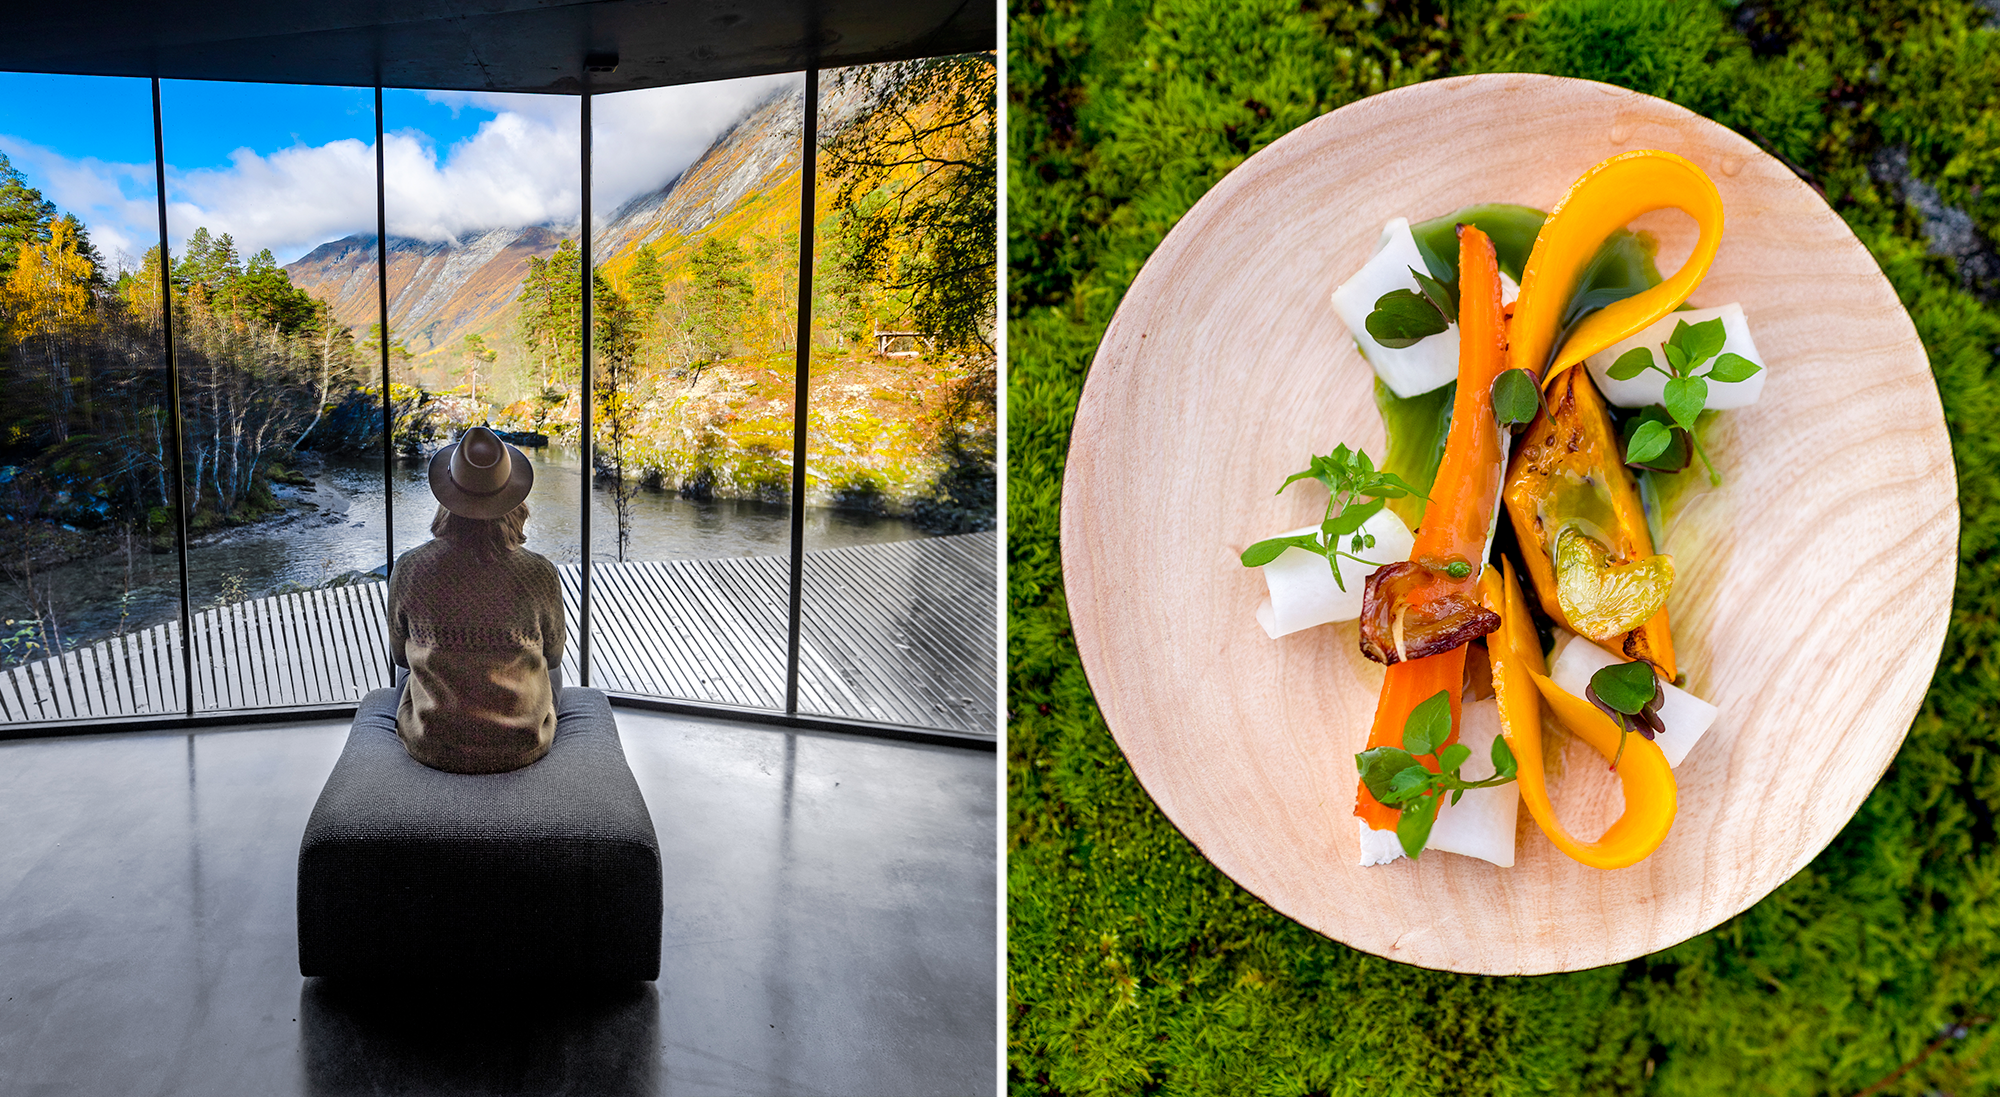 A guest and a plate of food at Juvet Landscape Hotel, Norway